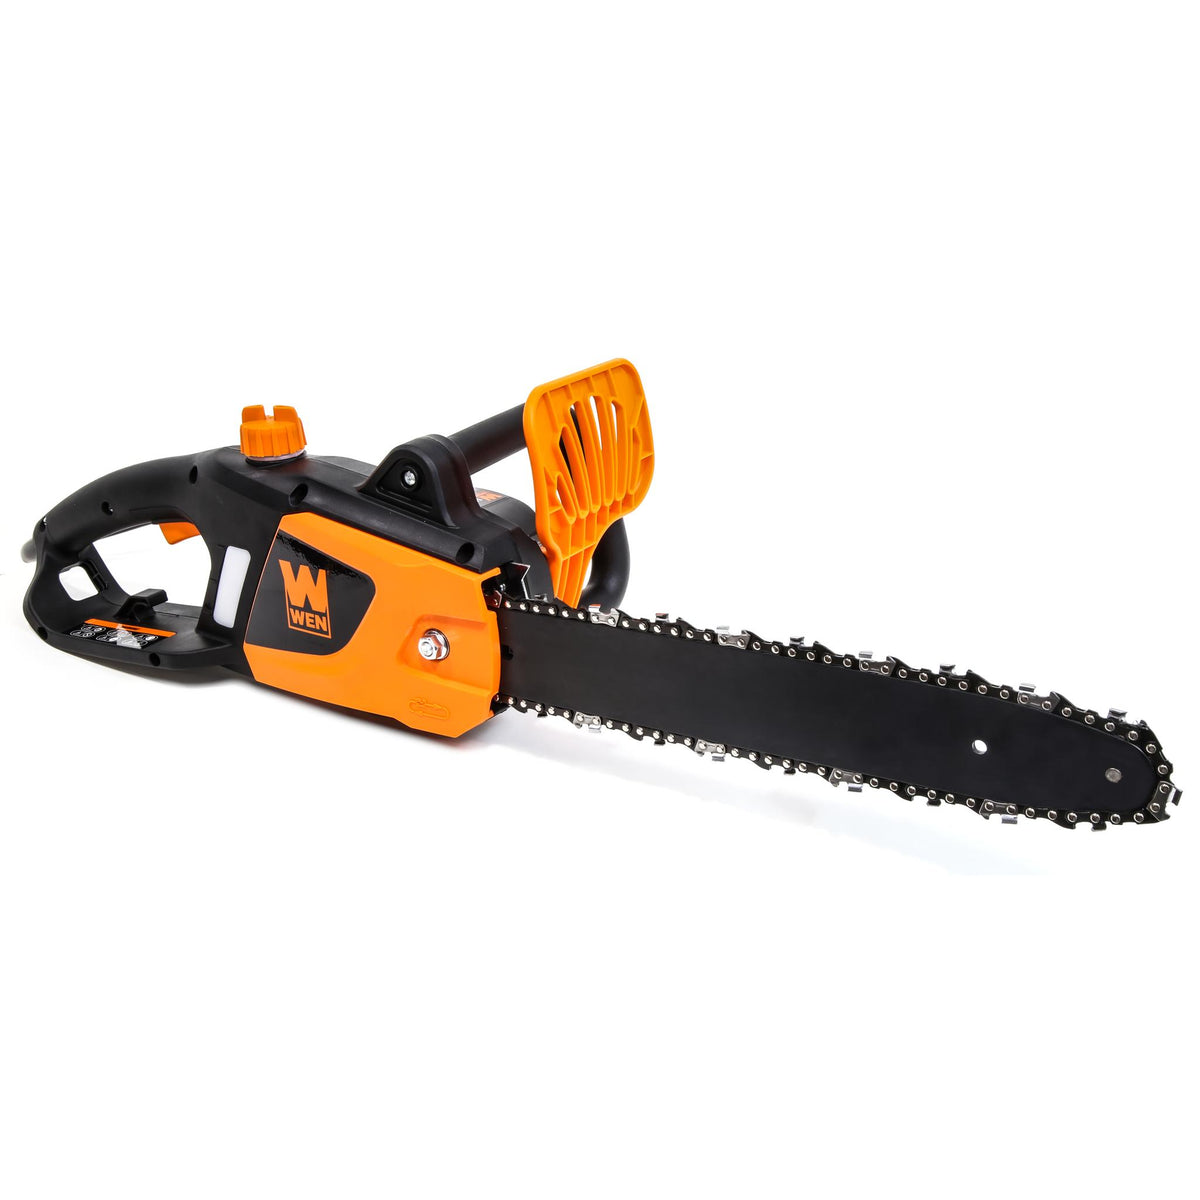  BLACK+DECKER Electric Chainsaw with 8-Inch Saw Chain